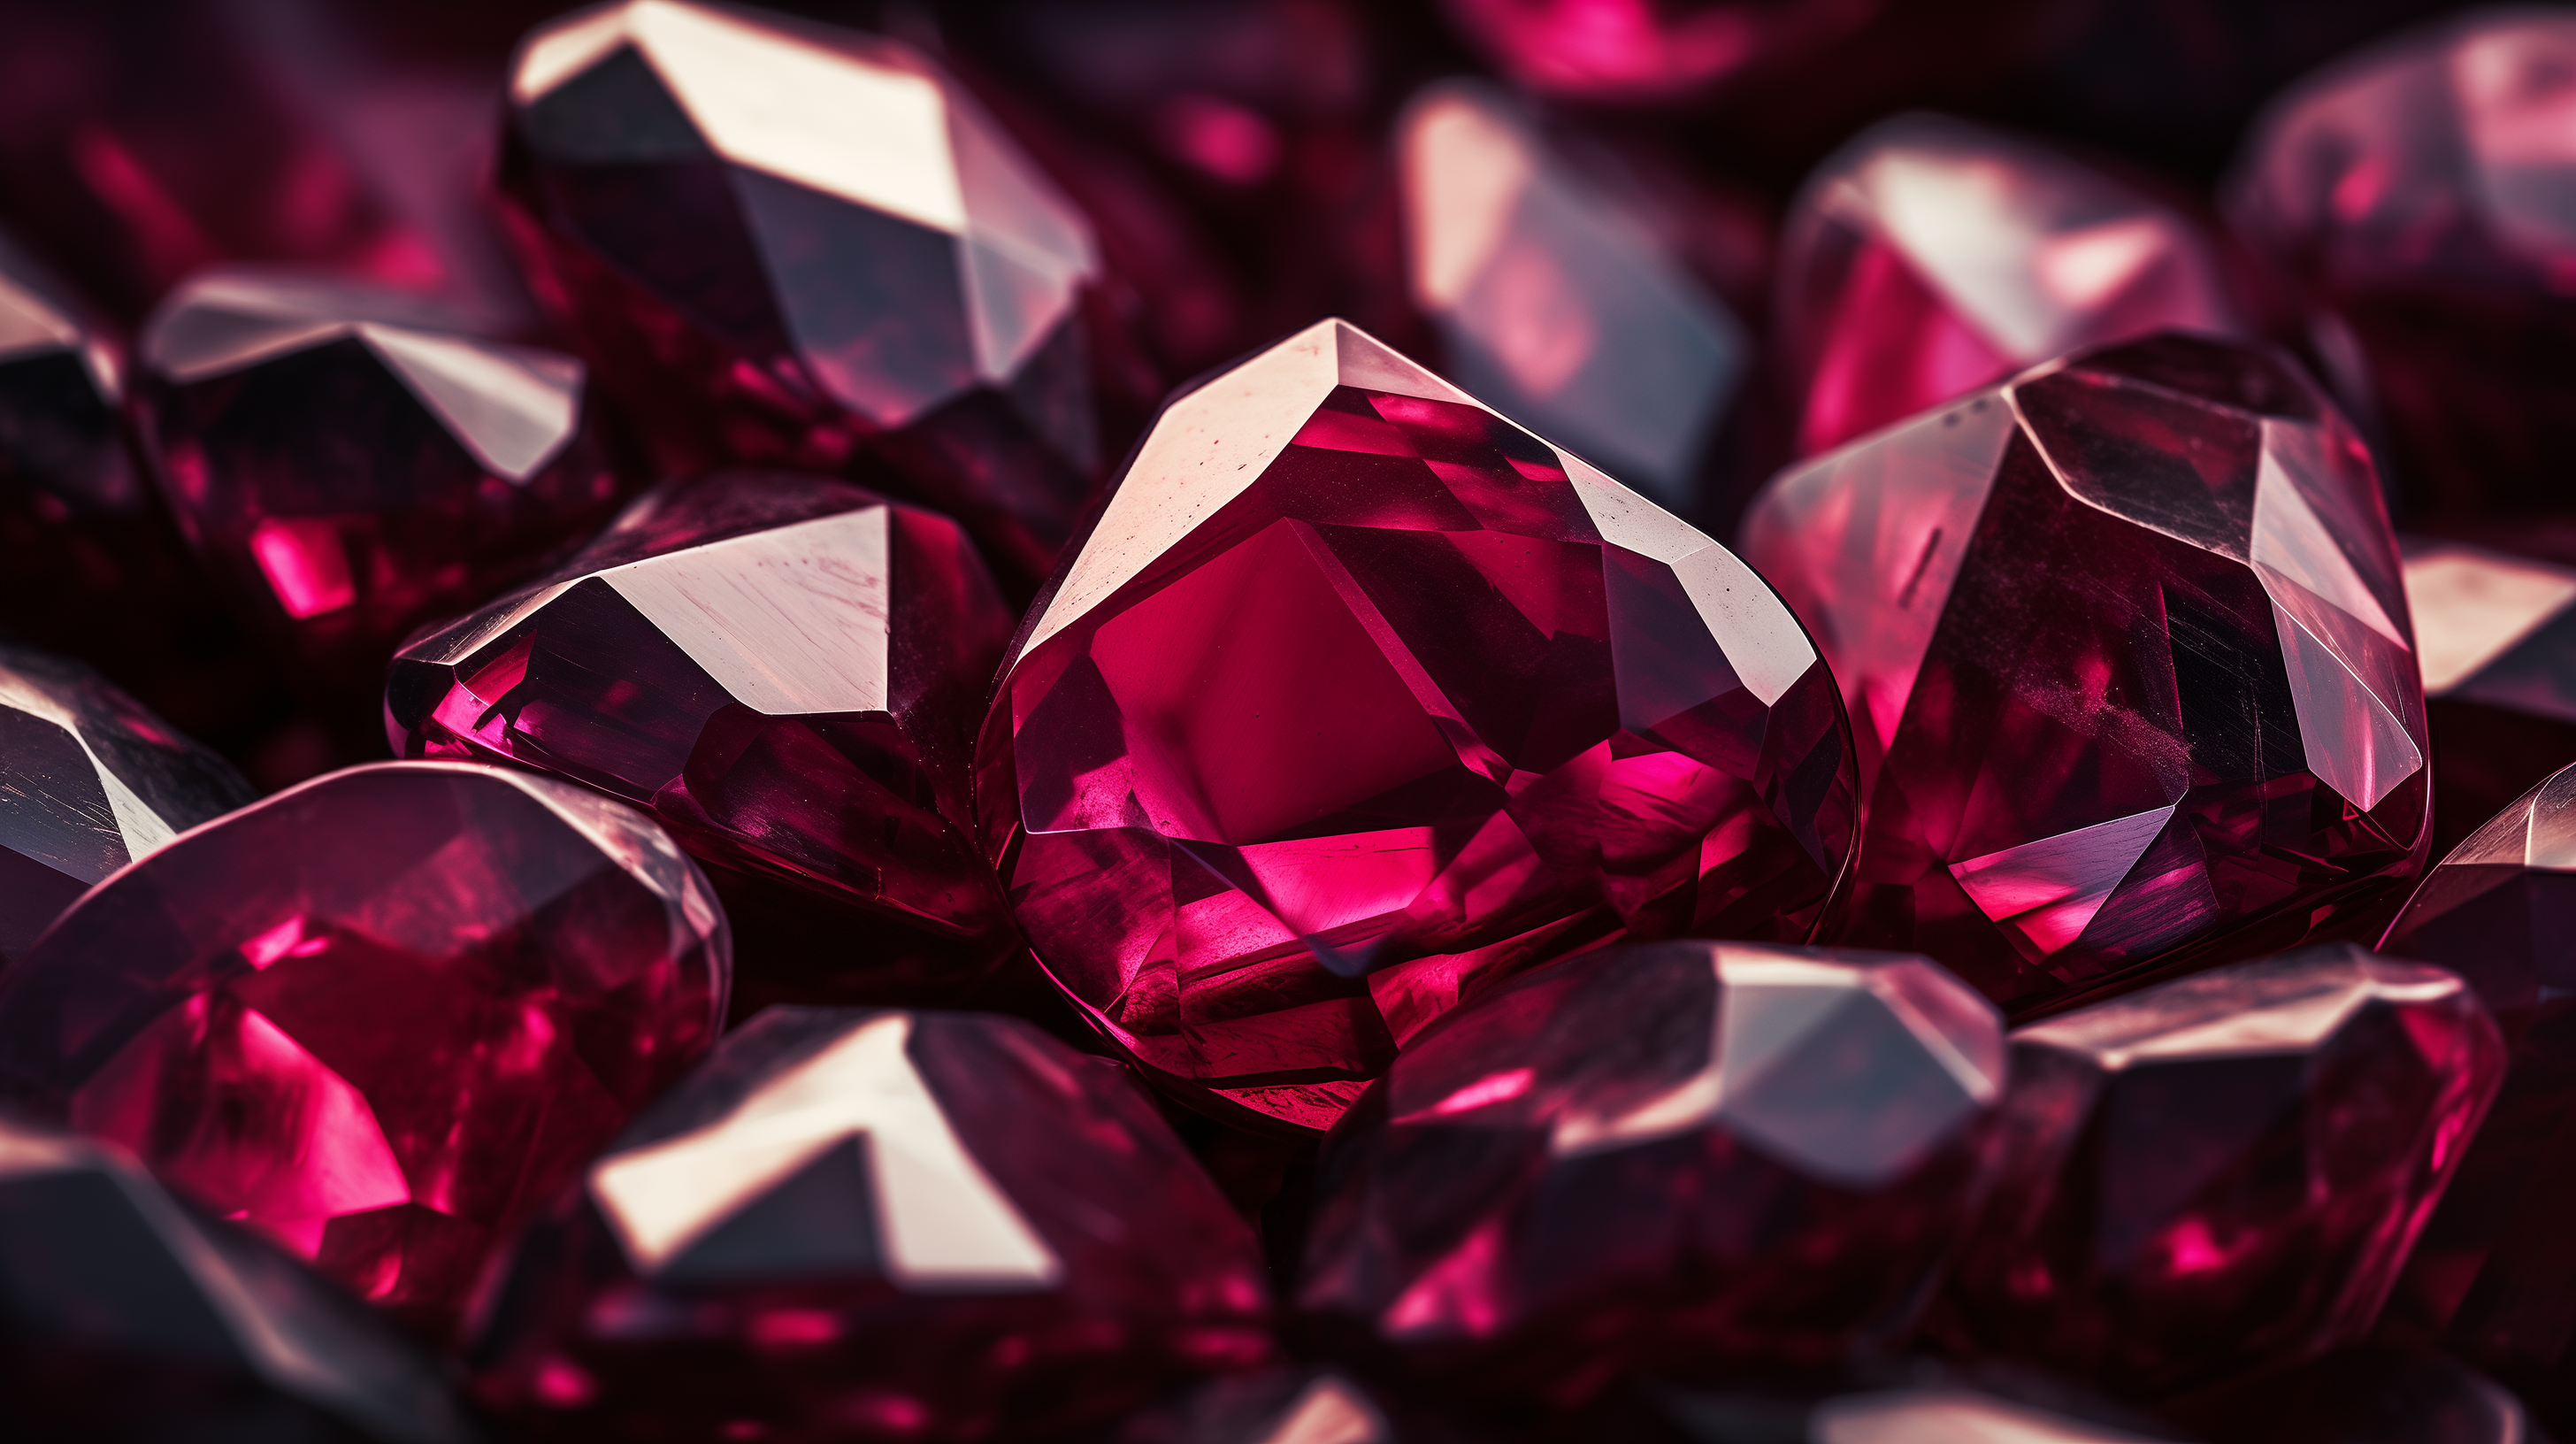 HD desktop wallpaper featuring a close-up of sparkling ruby gemstones, ideal for a luxurious and vibrant background.